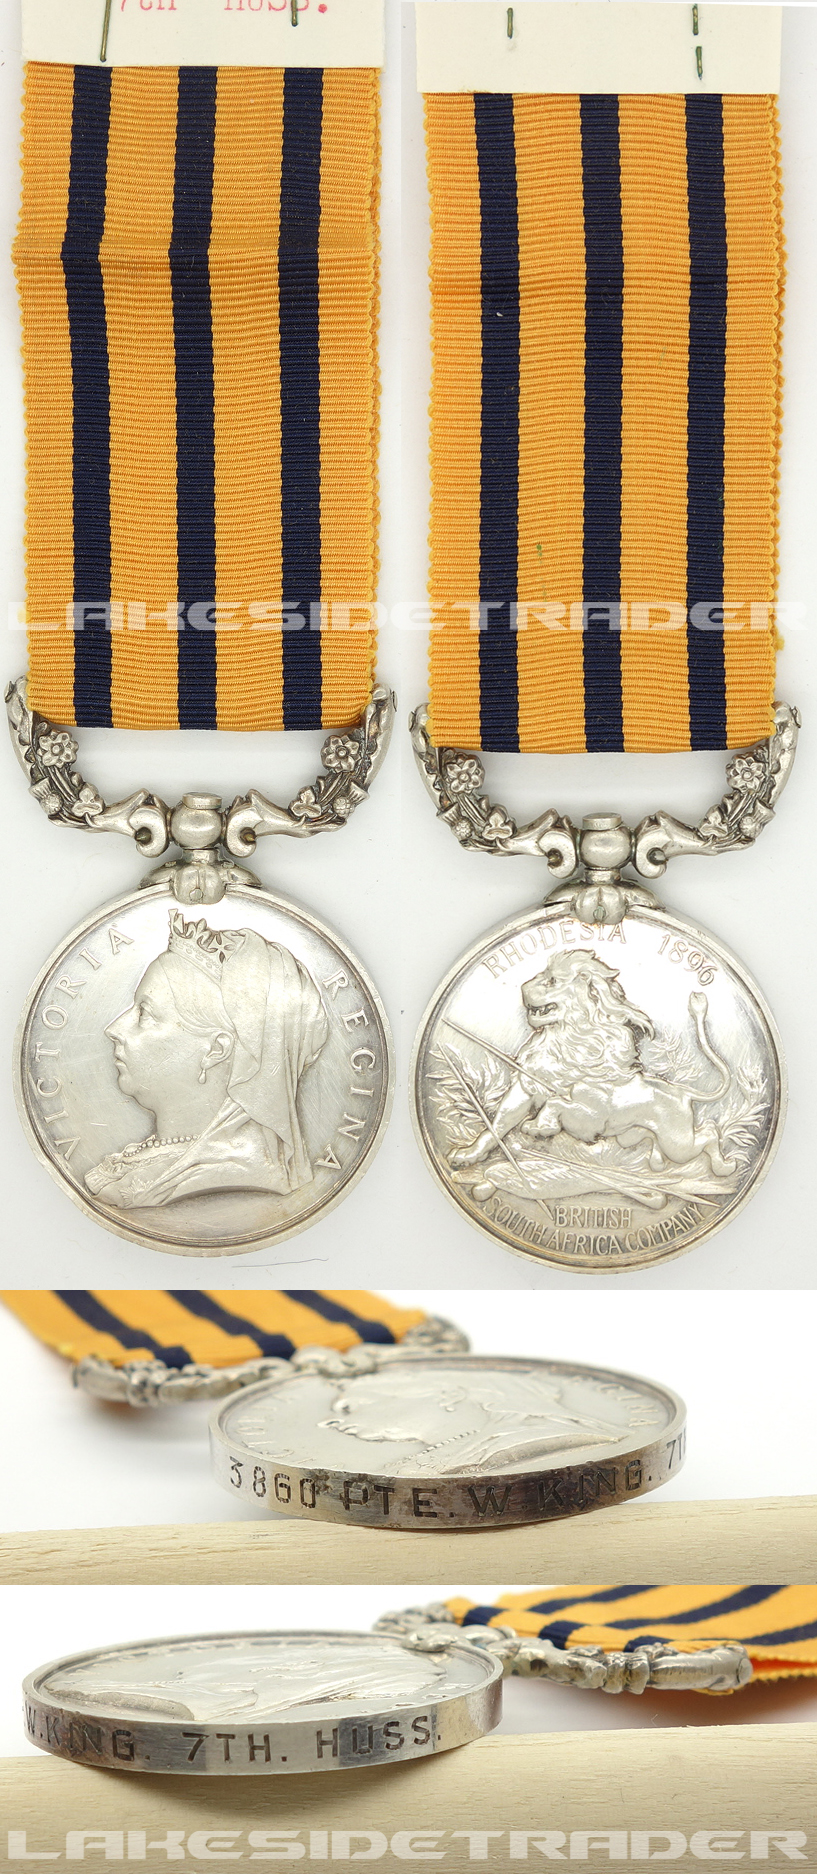 British South Africa Company's Medal w partial Research